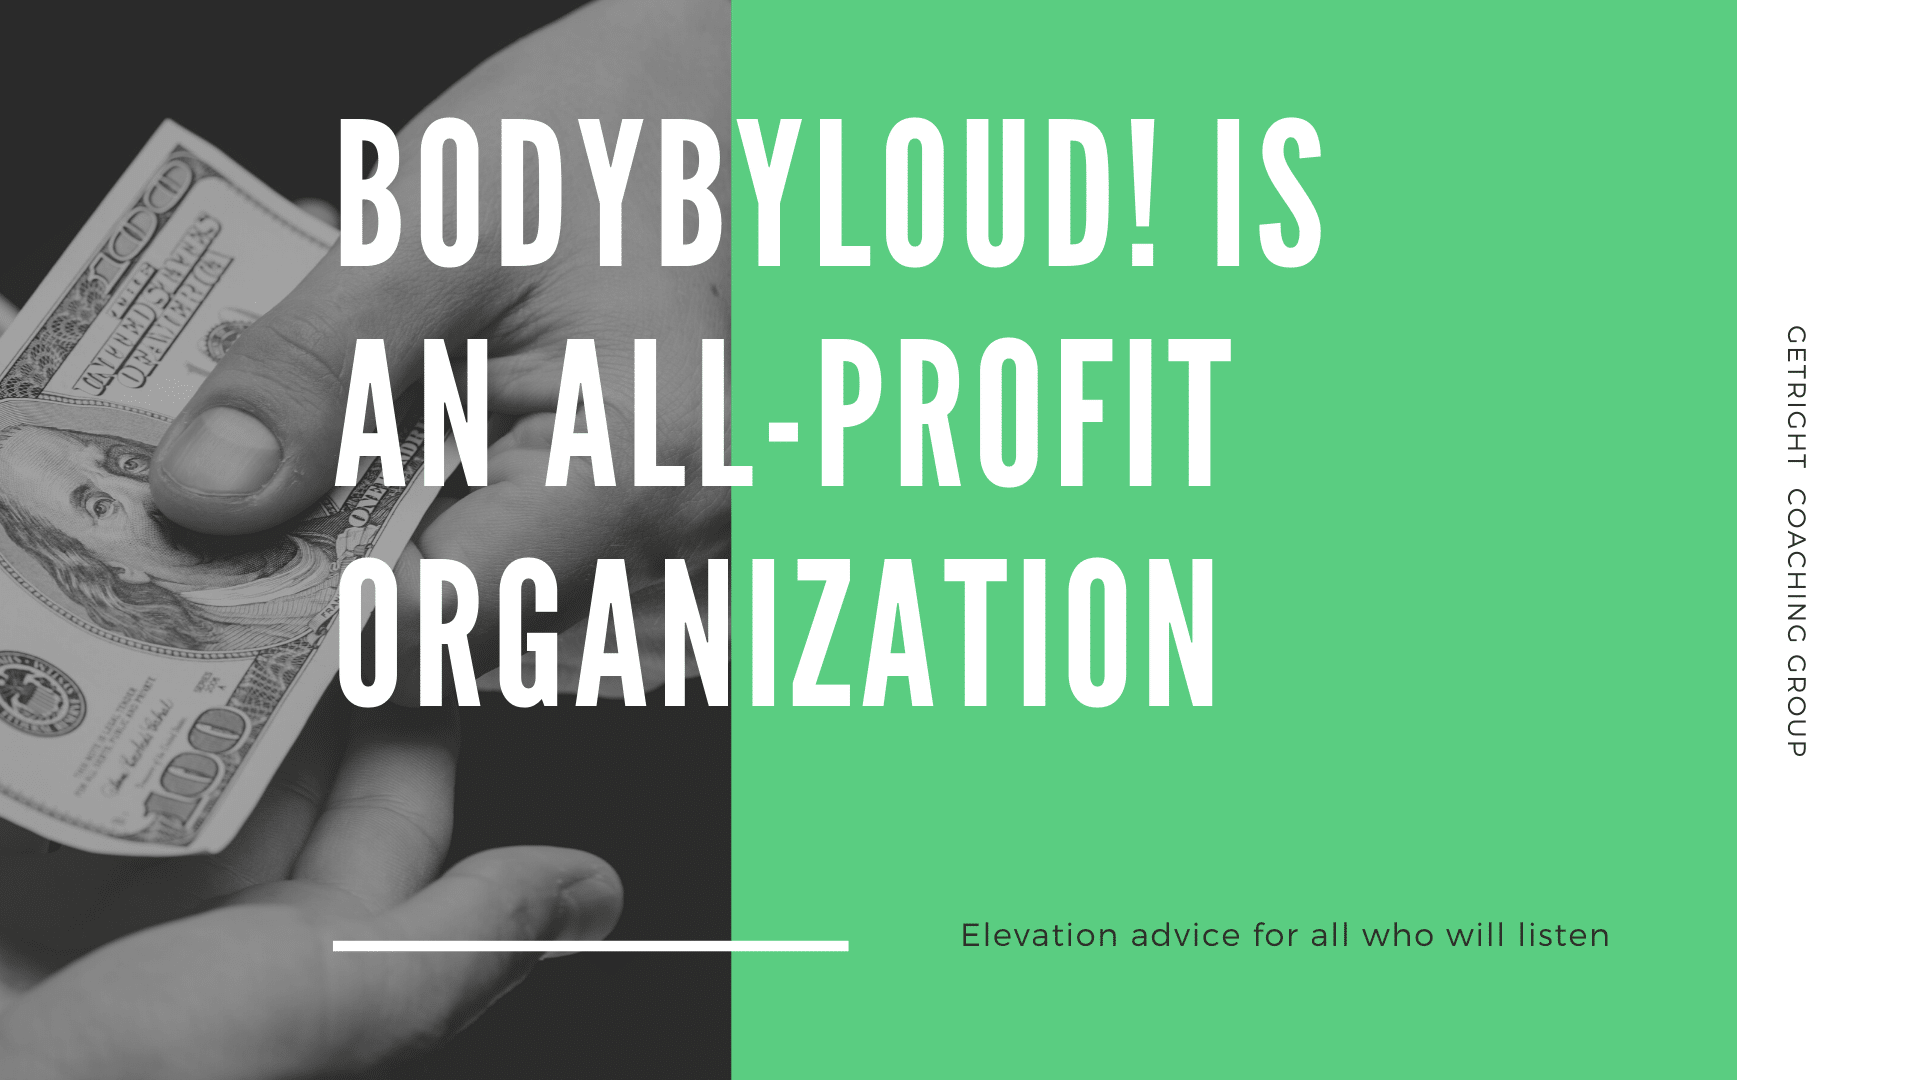 Bodybyloud! Is an All-Profit Organization